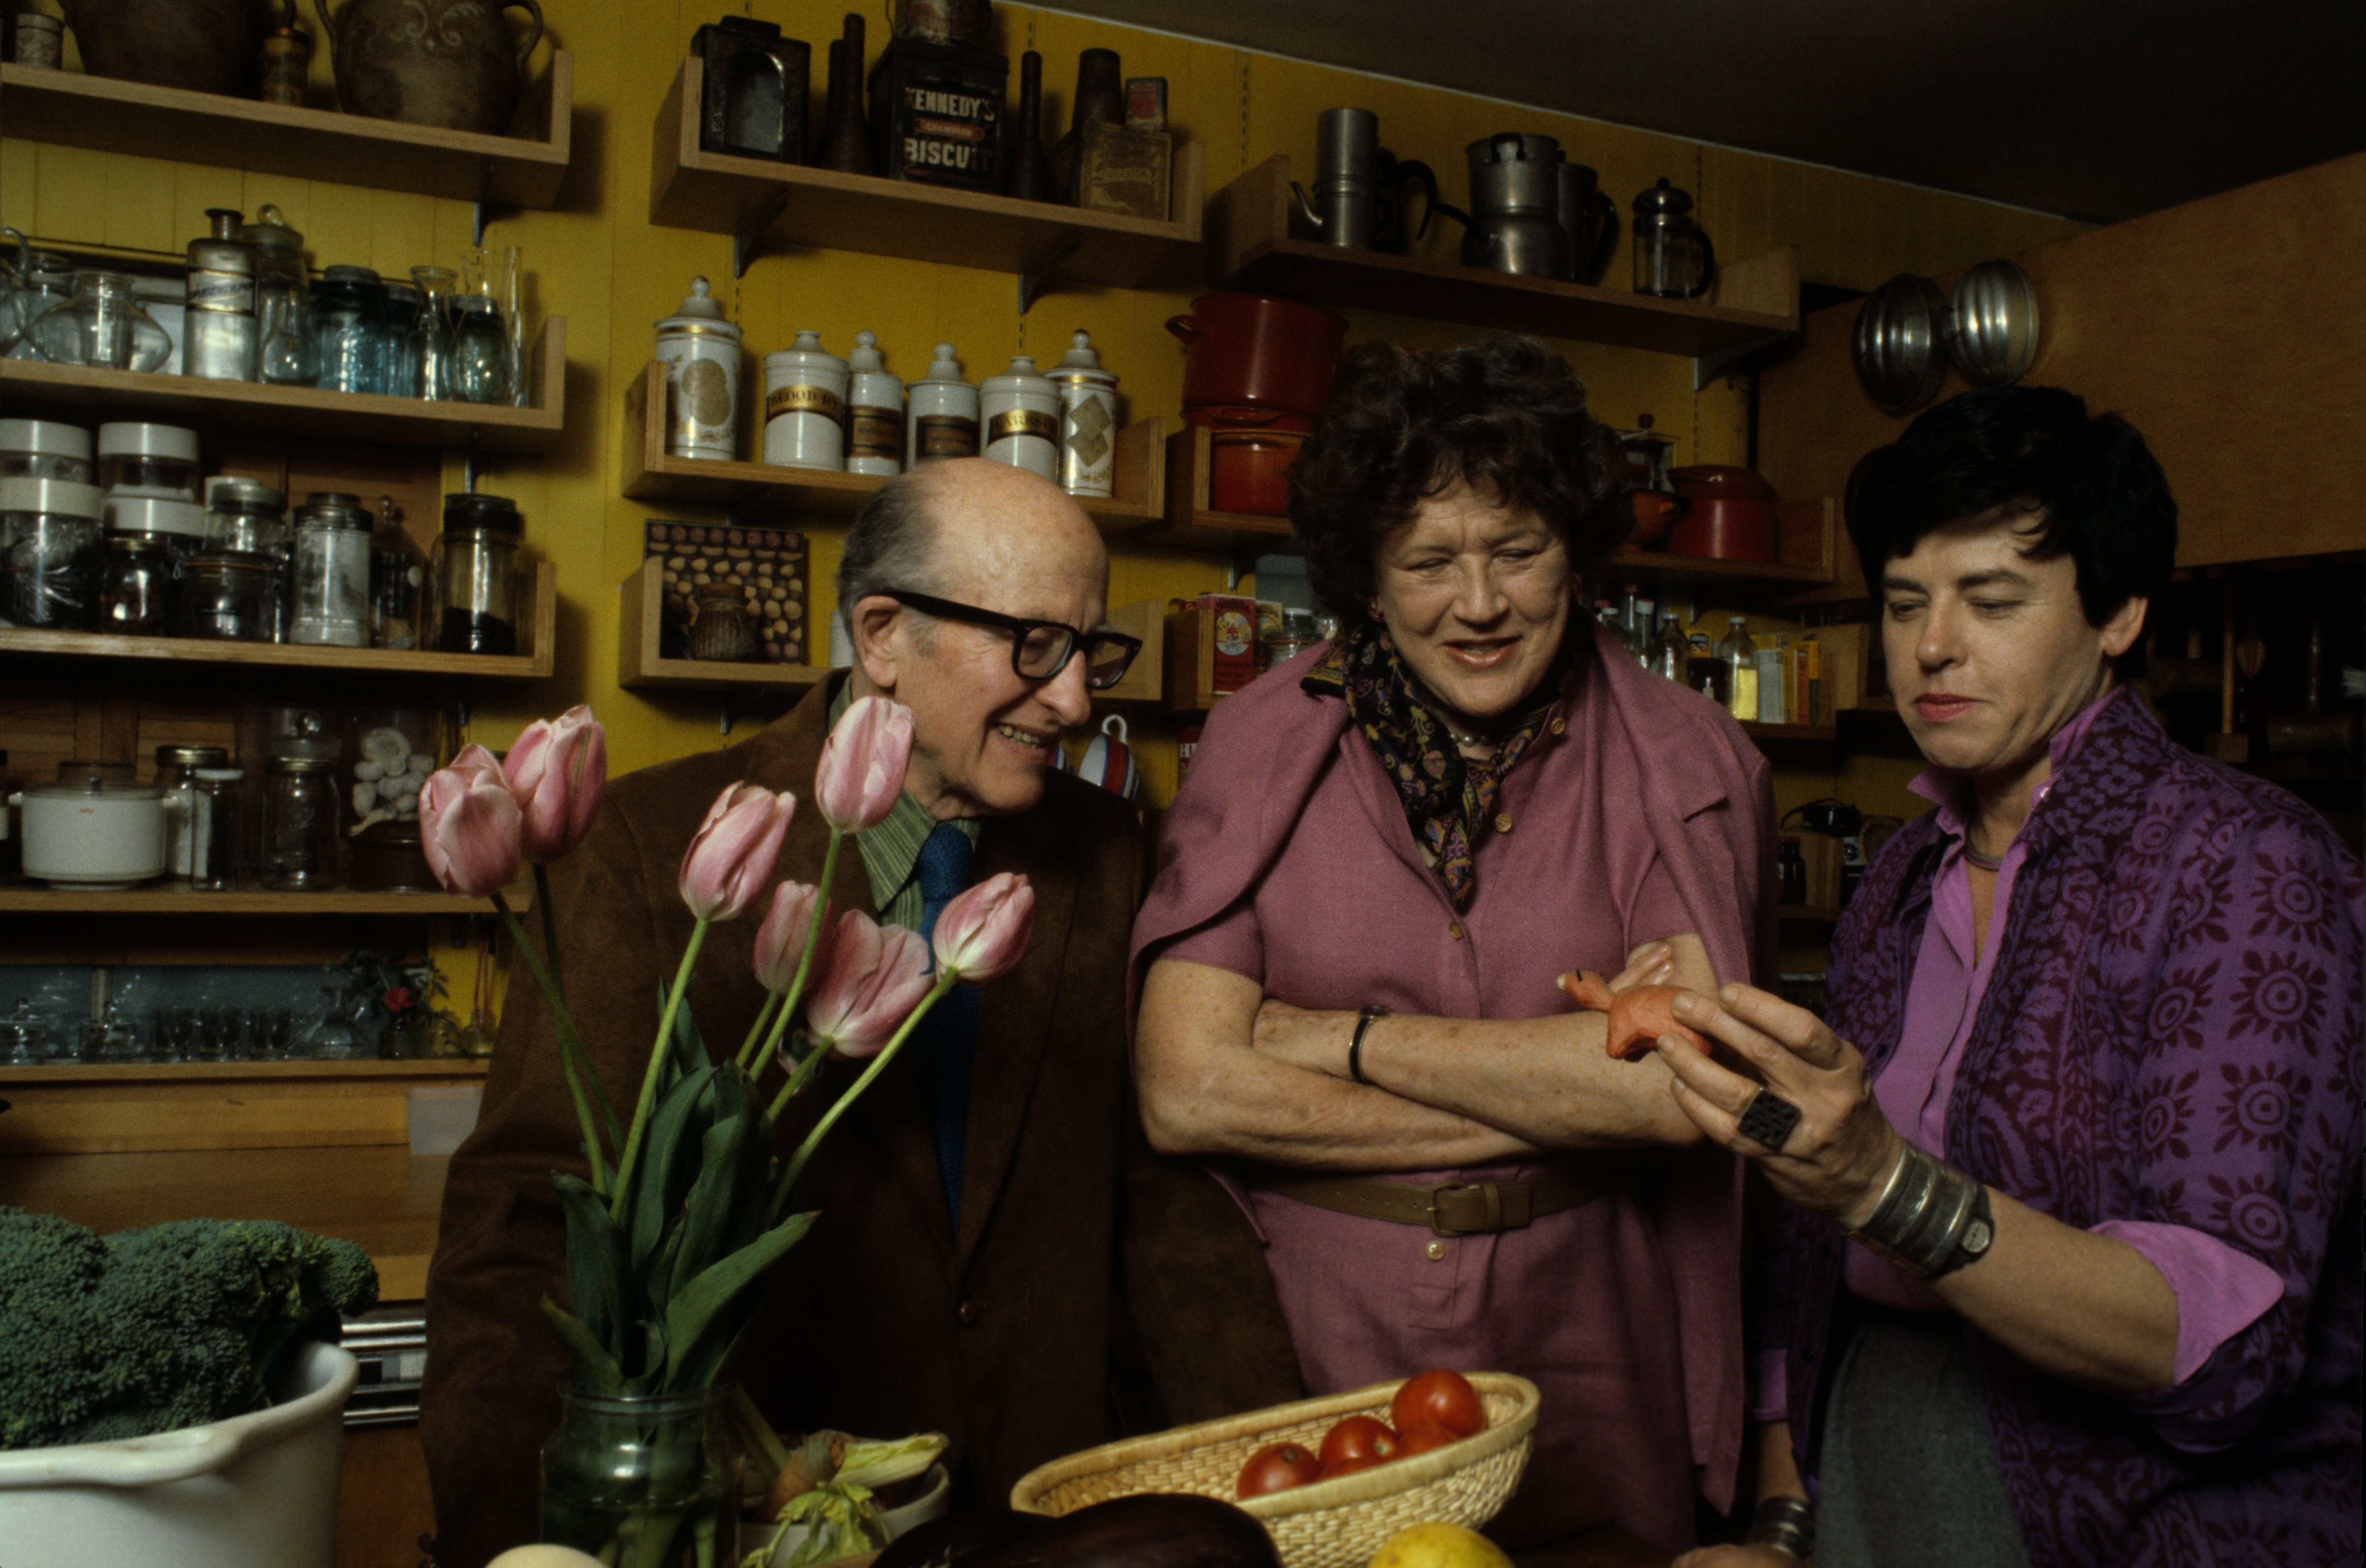 American author, and television personality Julia Child (center) and her husband, Paul Cushing Child look at a small sculpture held by an unidentified woman in a kitchen, May 1978. Photo: Getty Images